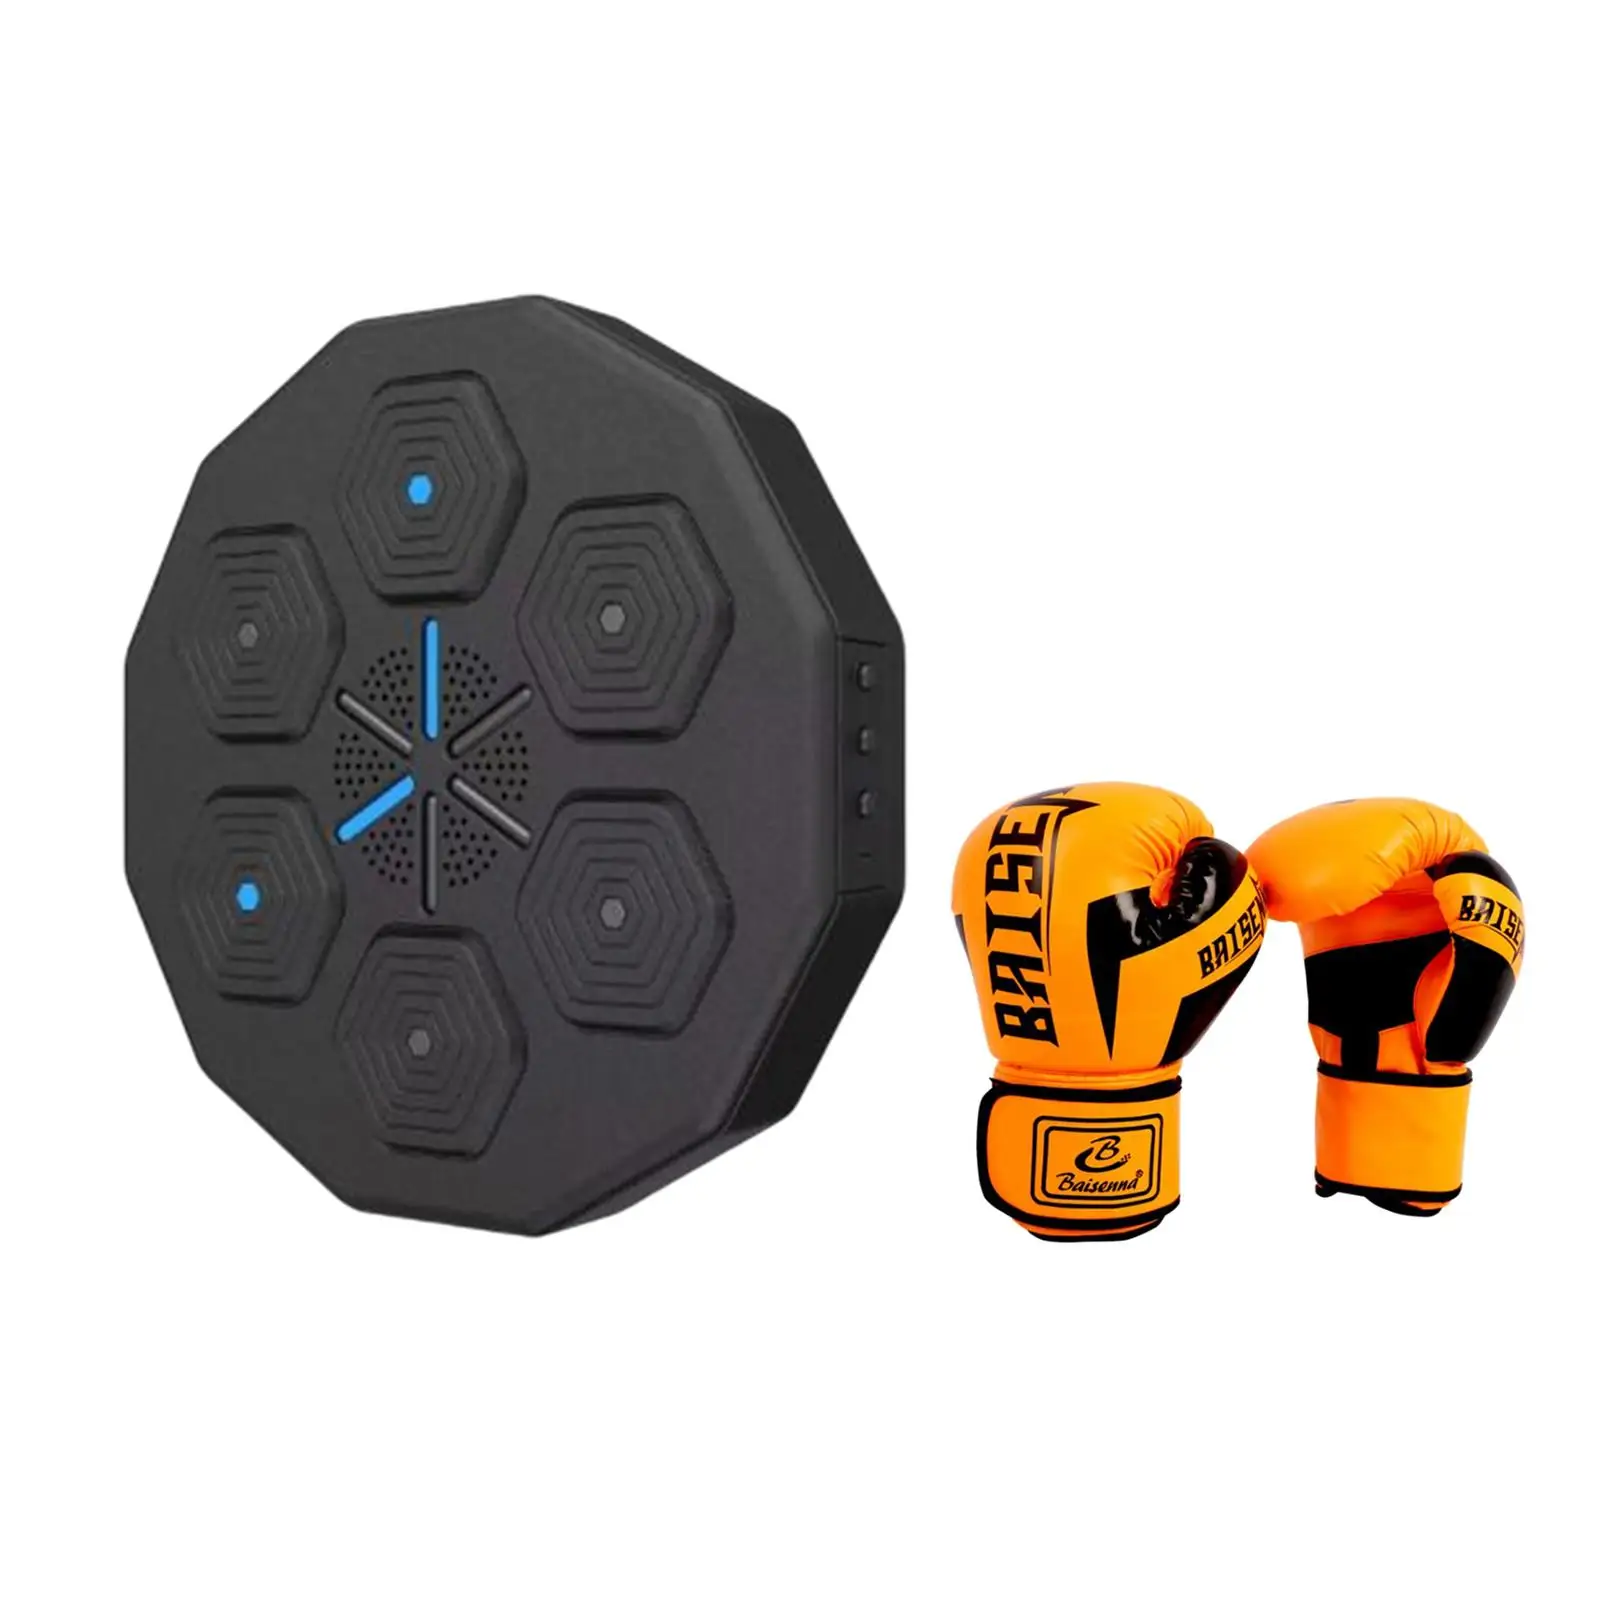 Electronic Music Boxing Wall Target Wall Mount Household with Gloves Reaction Target Rhythm Wall Target for Exercise Home Indoor